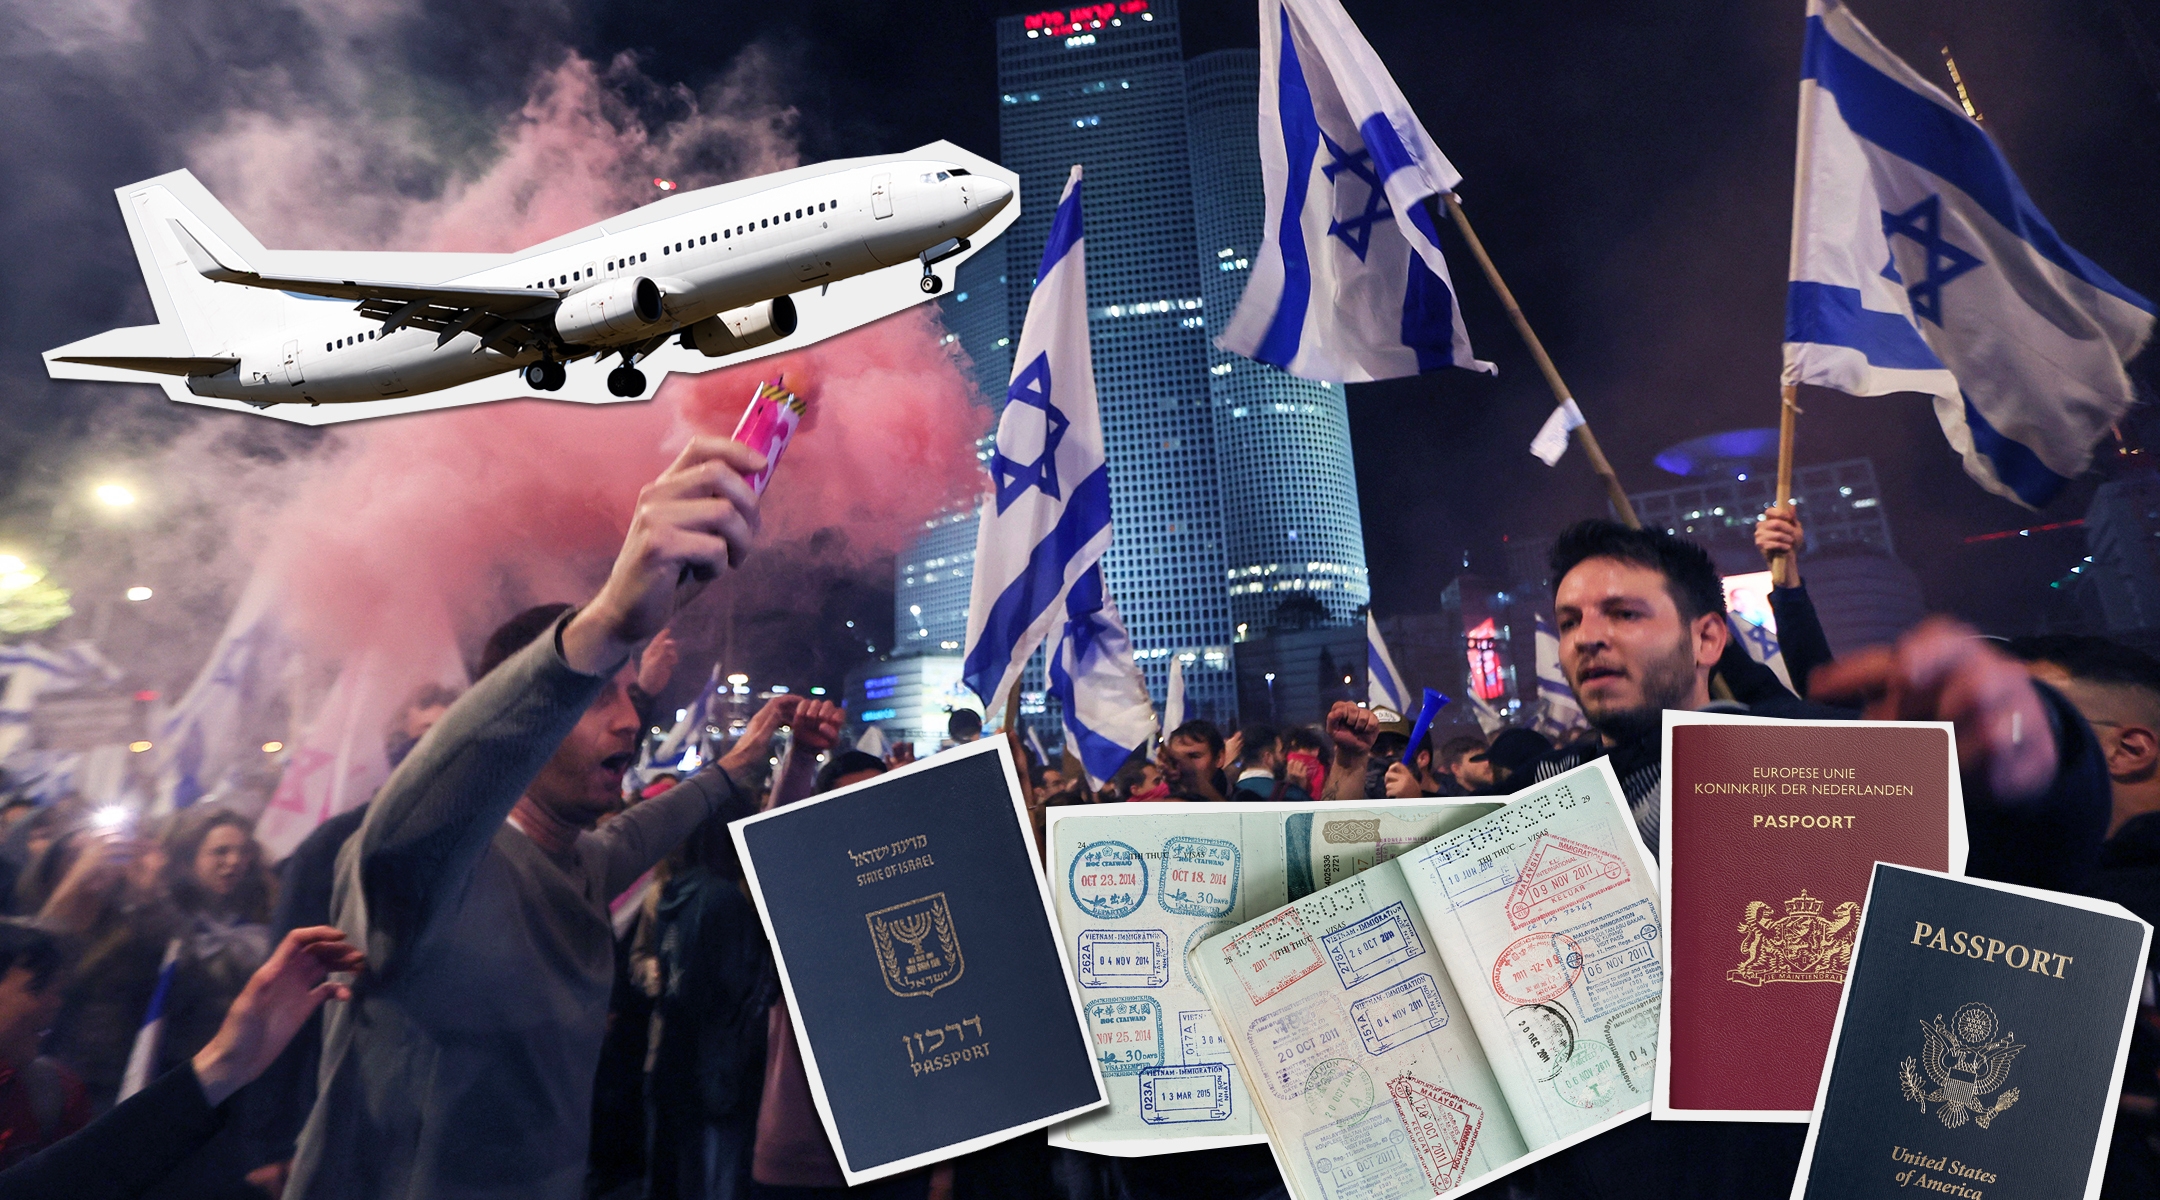 Some Israelis are trying to leave the country over the political upheaval there, according to accounts from Israelis and organizations that help them emigrate. (Collage by Grace Yagel)